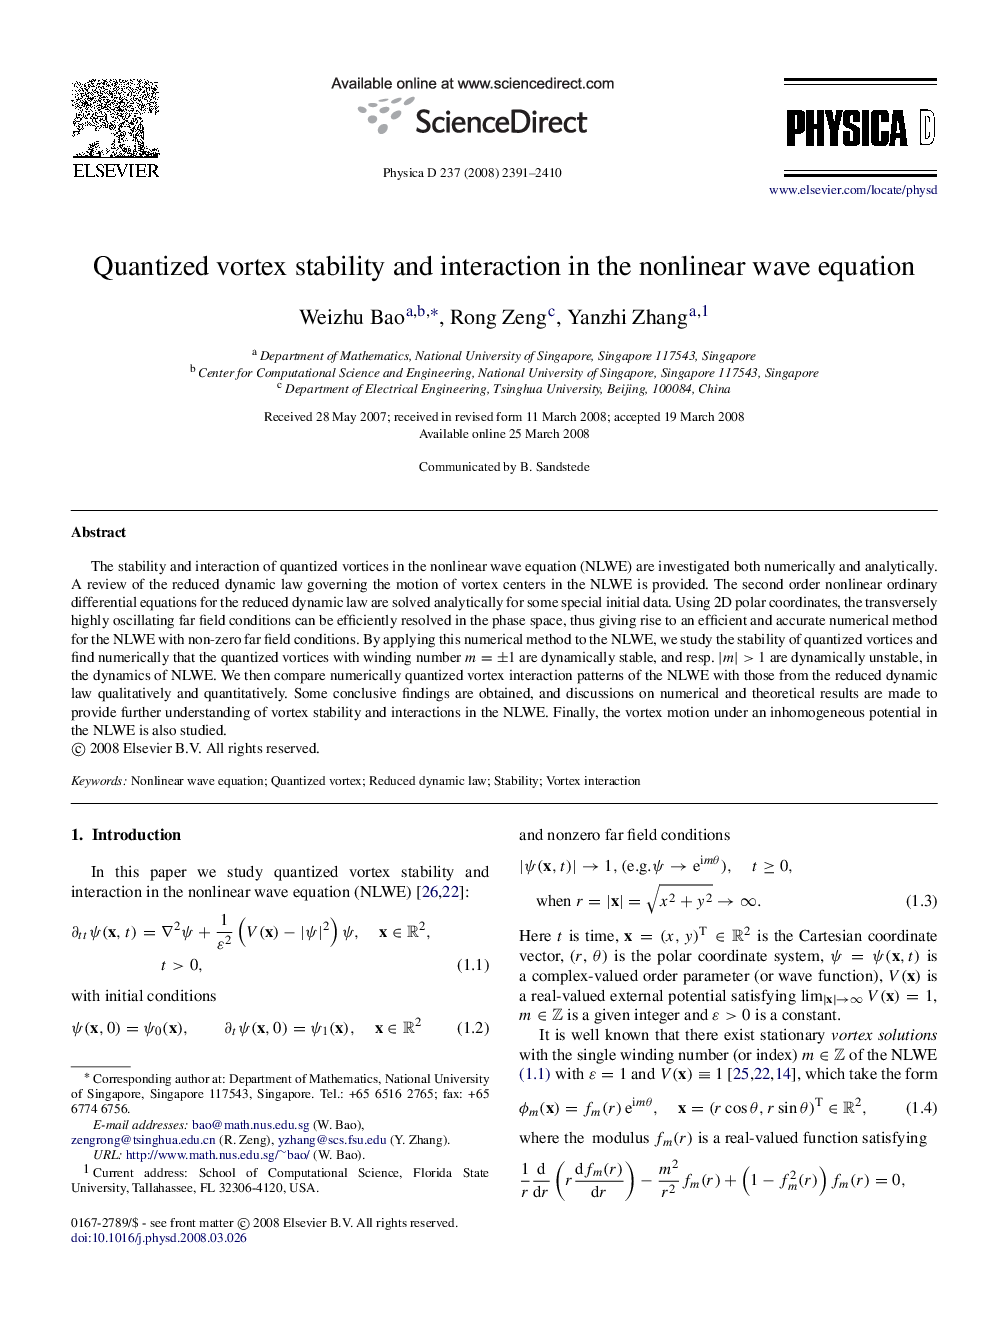 Quantized vortex stability and interaction in the nonlinear wave equation